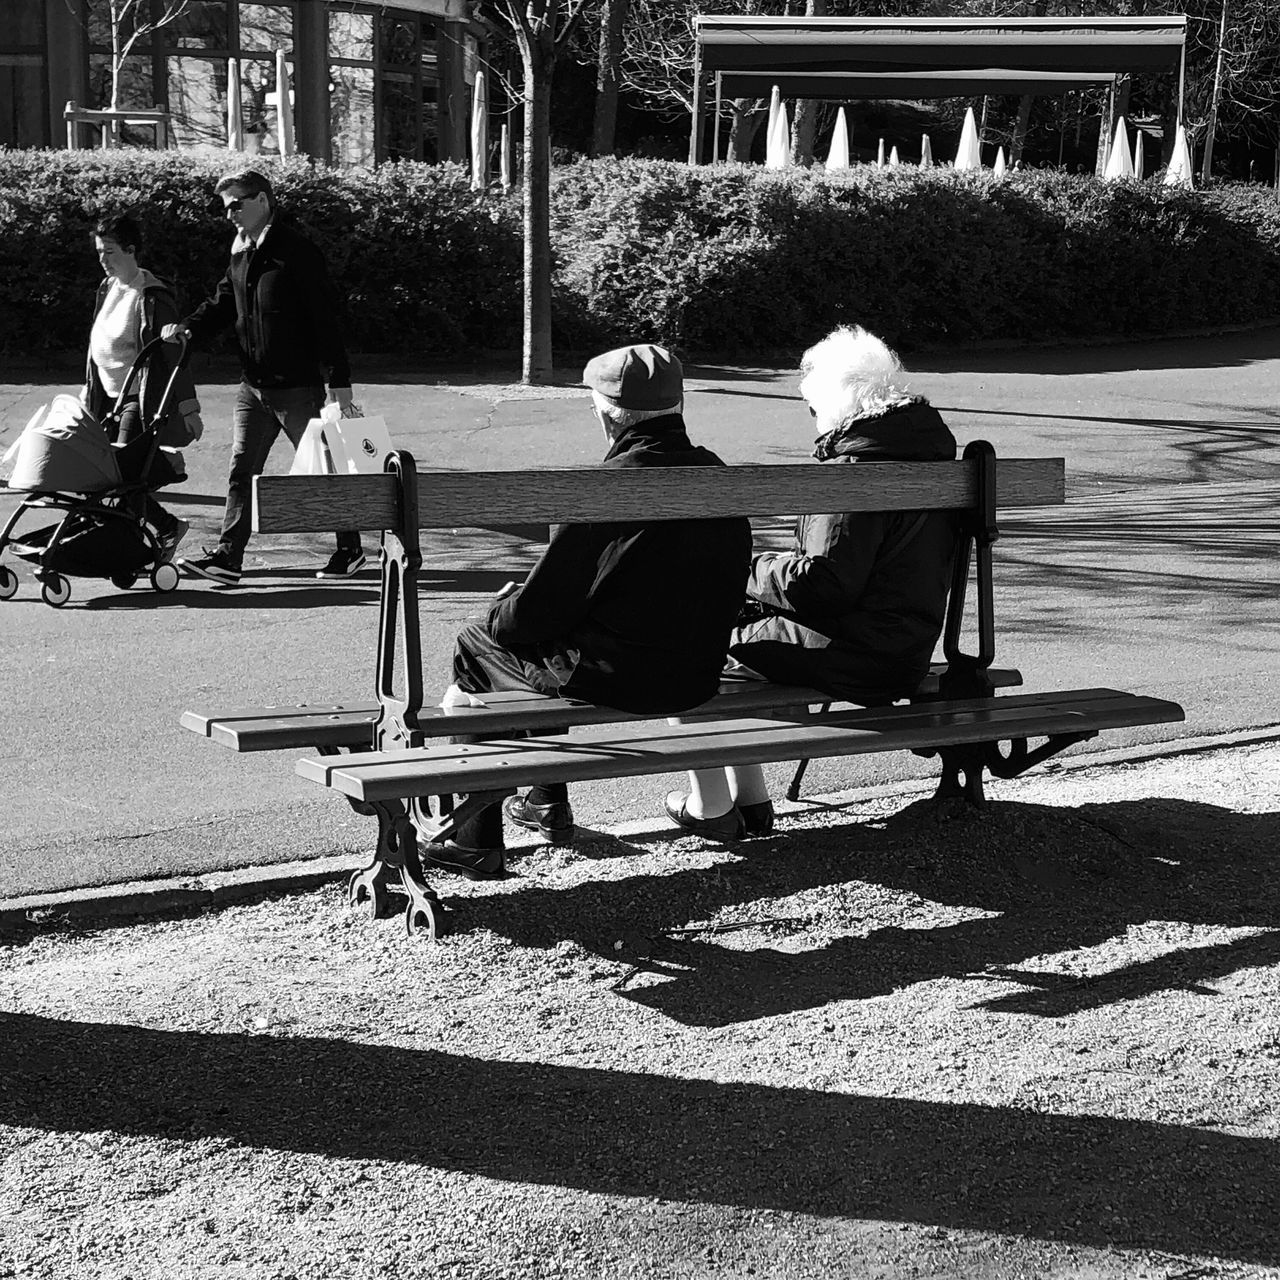 sitting, real people, men, bench, seat, nature, women, lifestyles, sunlight, shadow, group of people, full length, rear view, day, leisure activity, people, adult, park, males, relaxation, outdoors, park bench